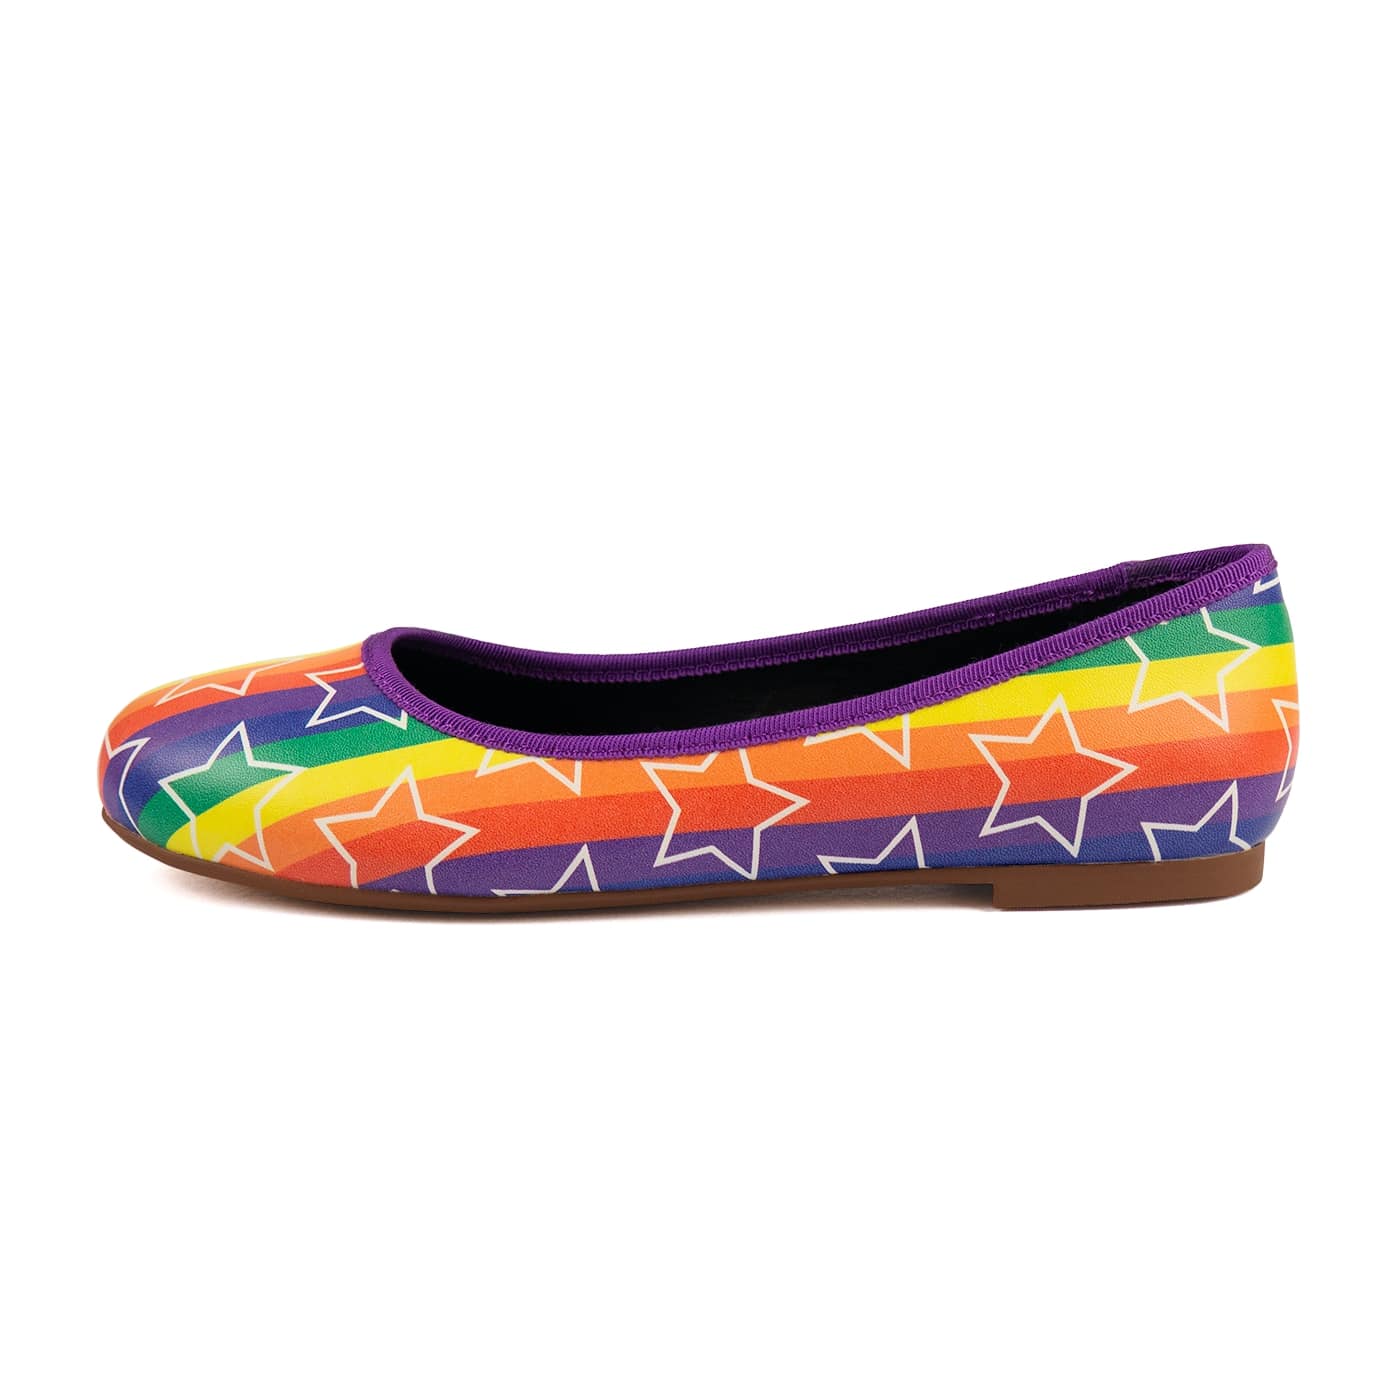 Starburst Ballet Flats by RainbowsAndFairies.com.au (Rainbow Brite Inspired - Stars - Mismatched Shoes - Pride - Rainbow Stripes - Slip On Shoes) - SKU: FW_BALET_STARB_ORG - Pic-03